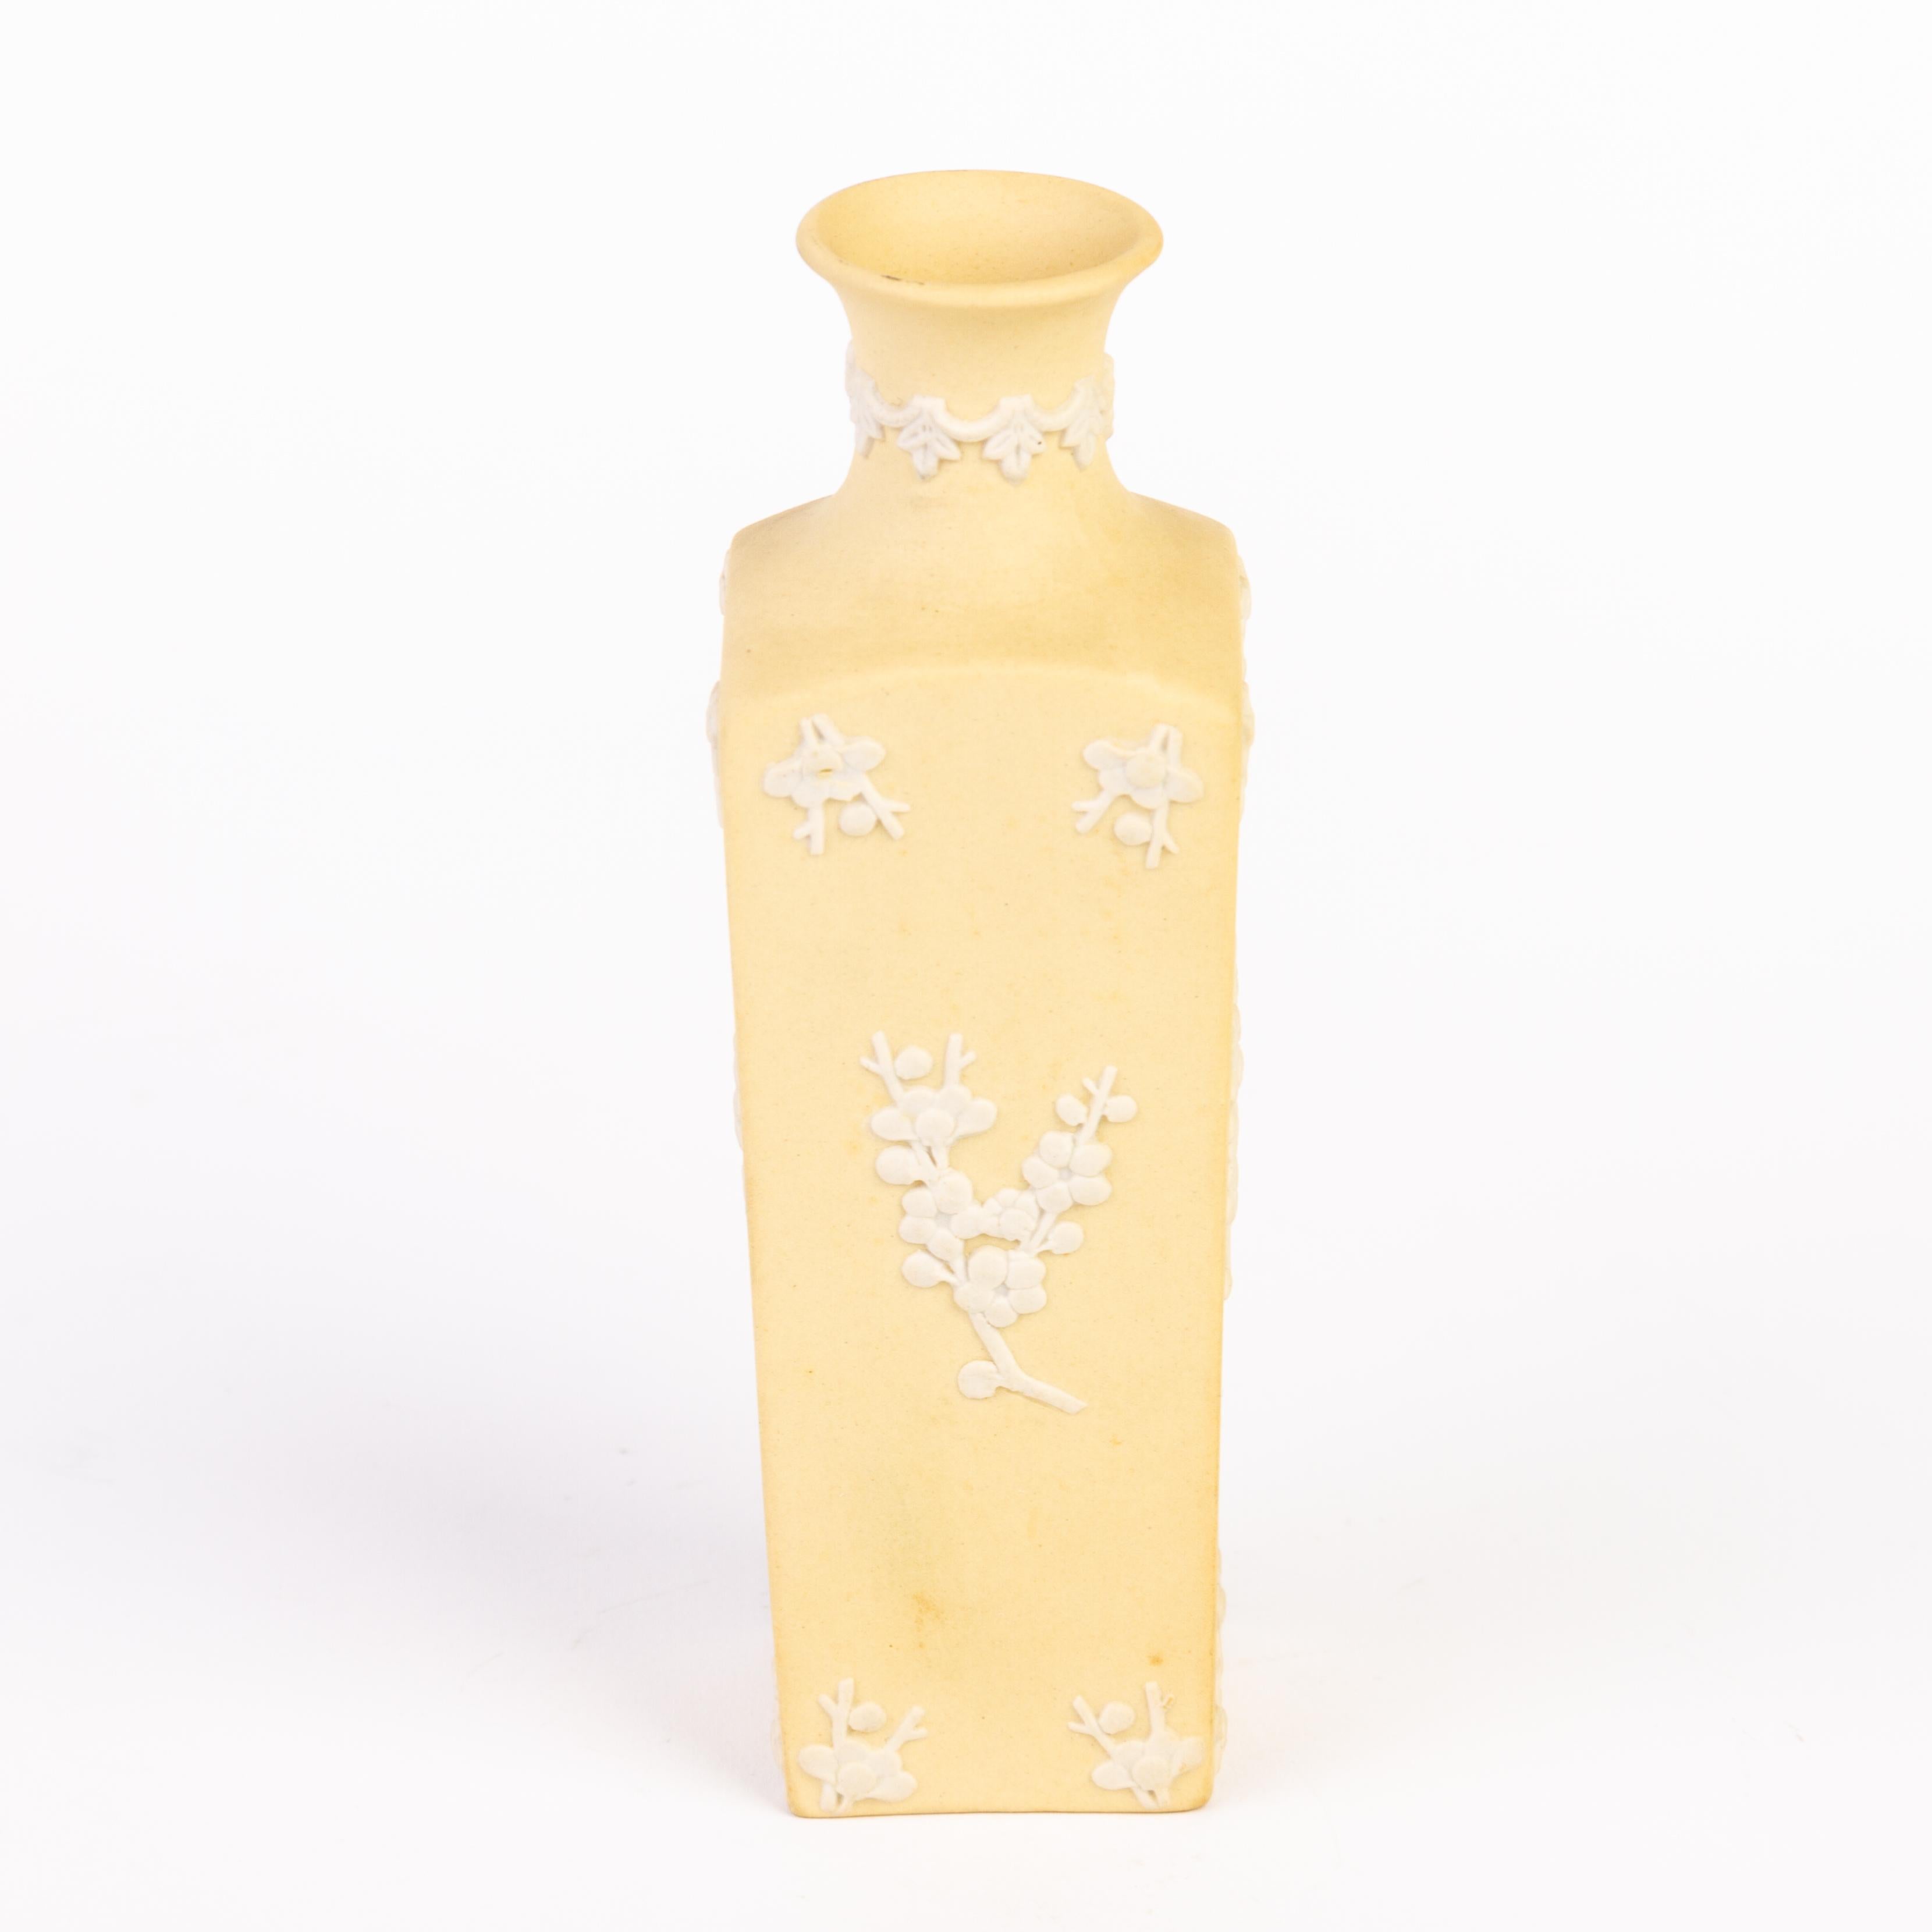 From a private collection.
Free international shipping.
Wedgwood Primrose Yellow Jasperware Prunus Vase 